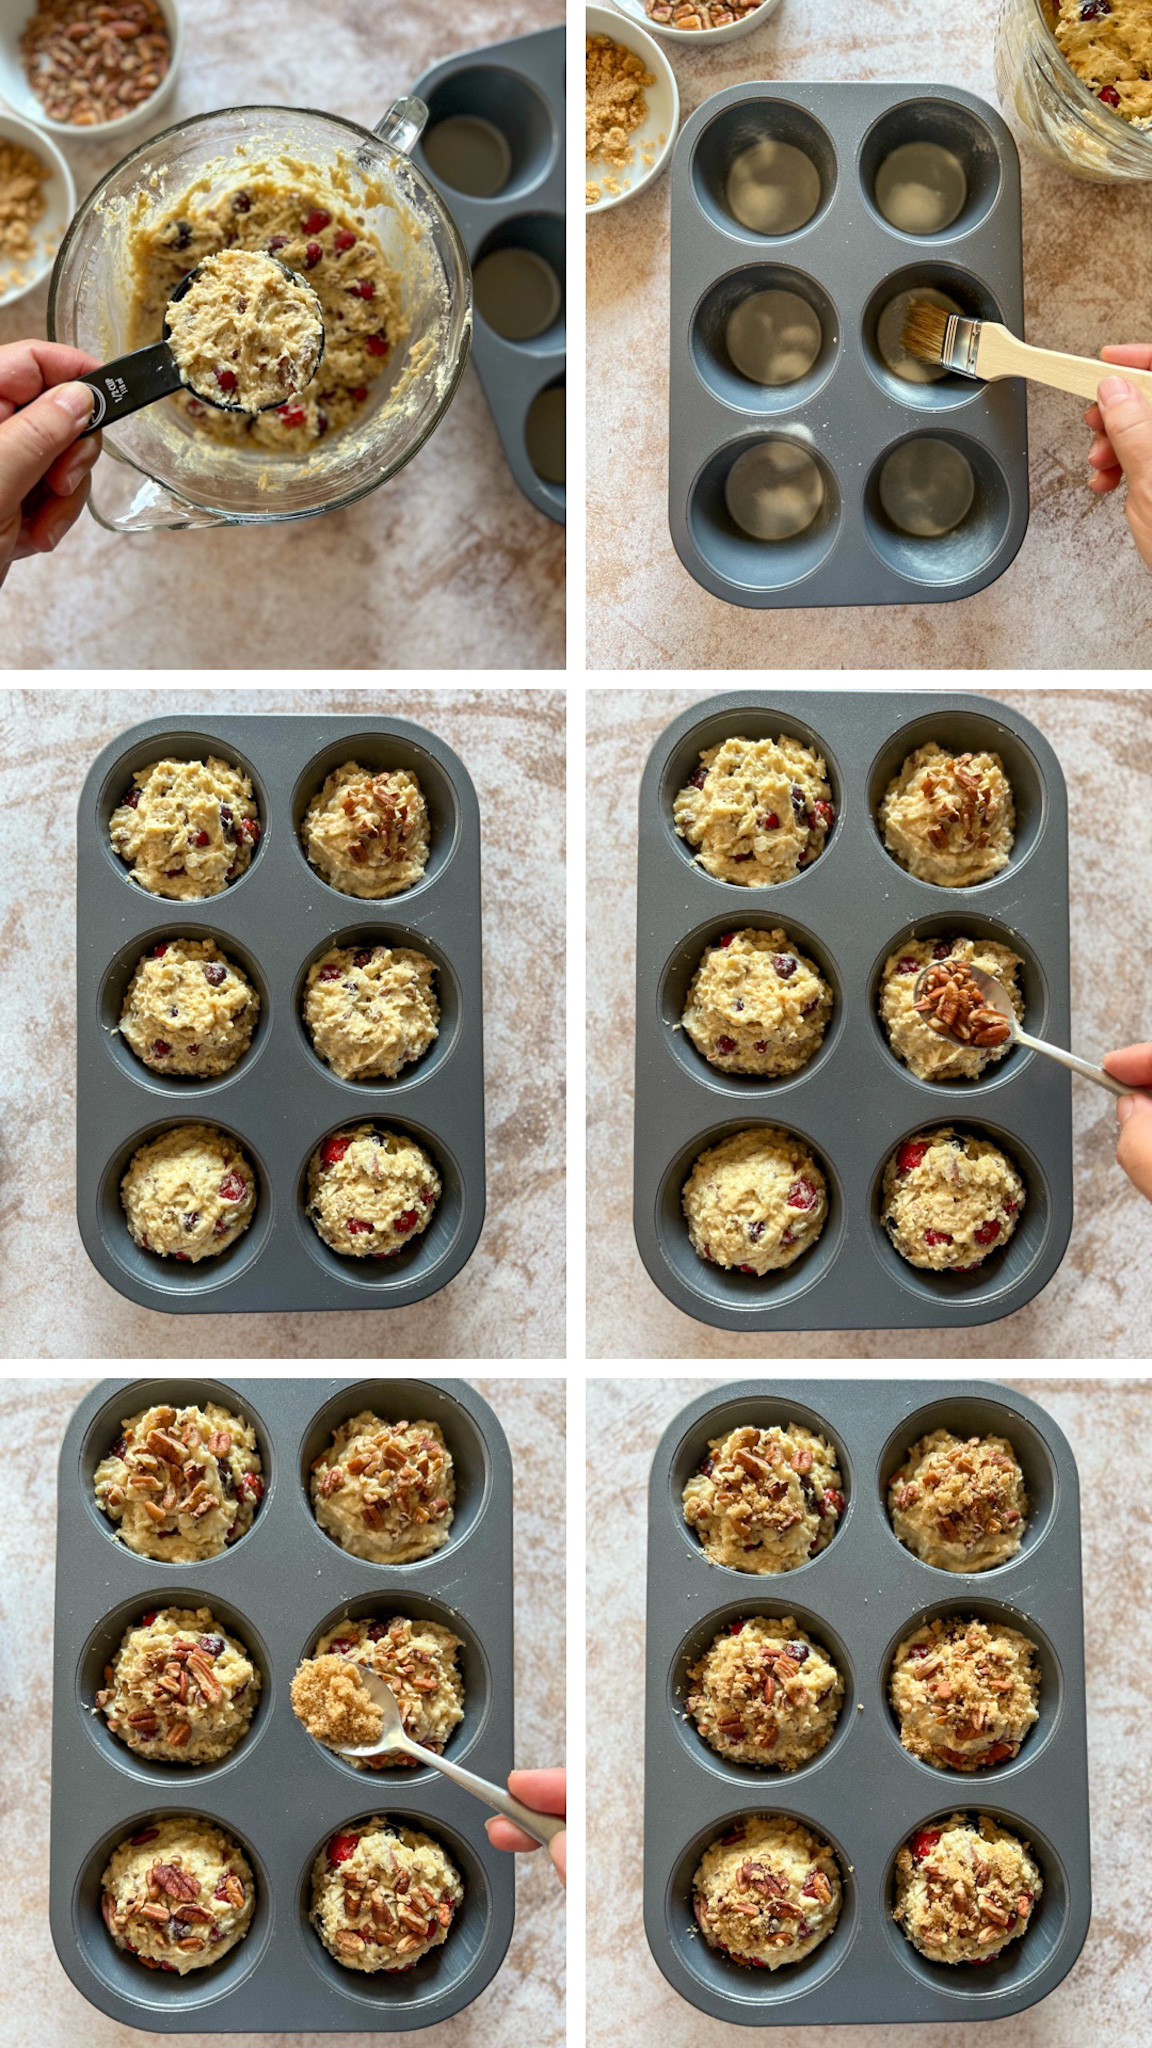 Step by step on how to scoop the biscuit dough into the muffin tin